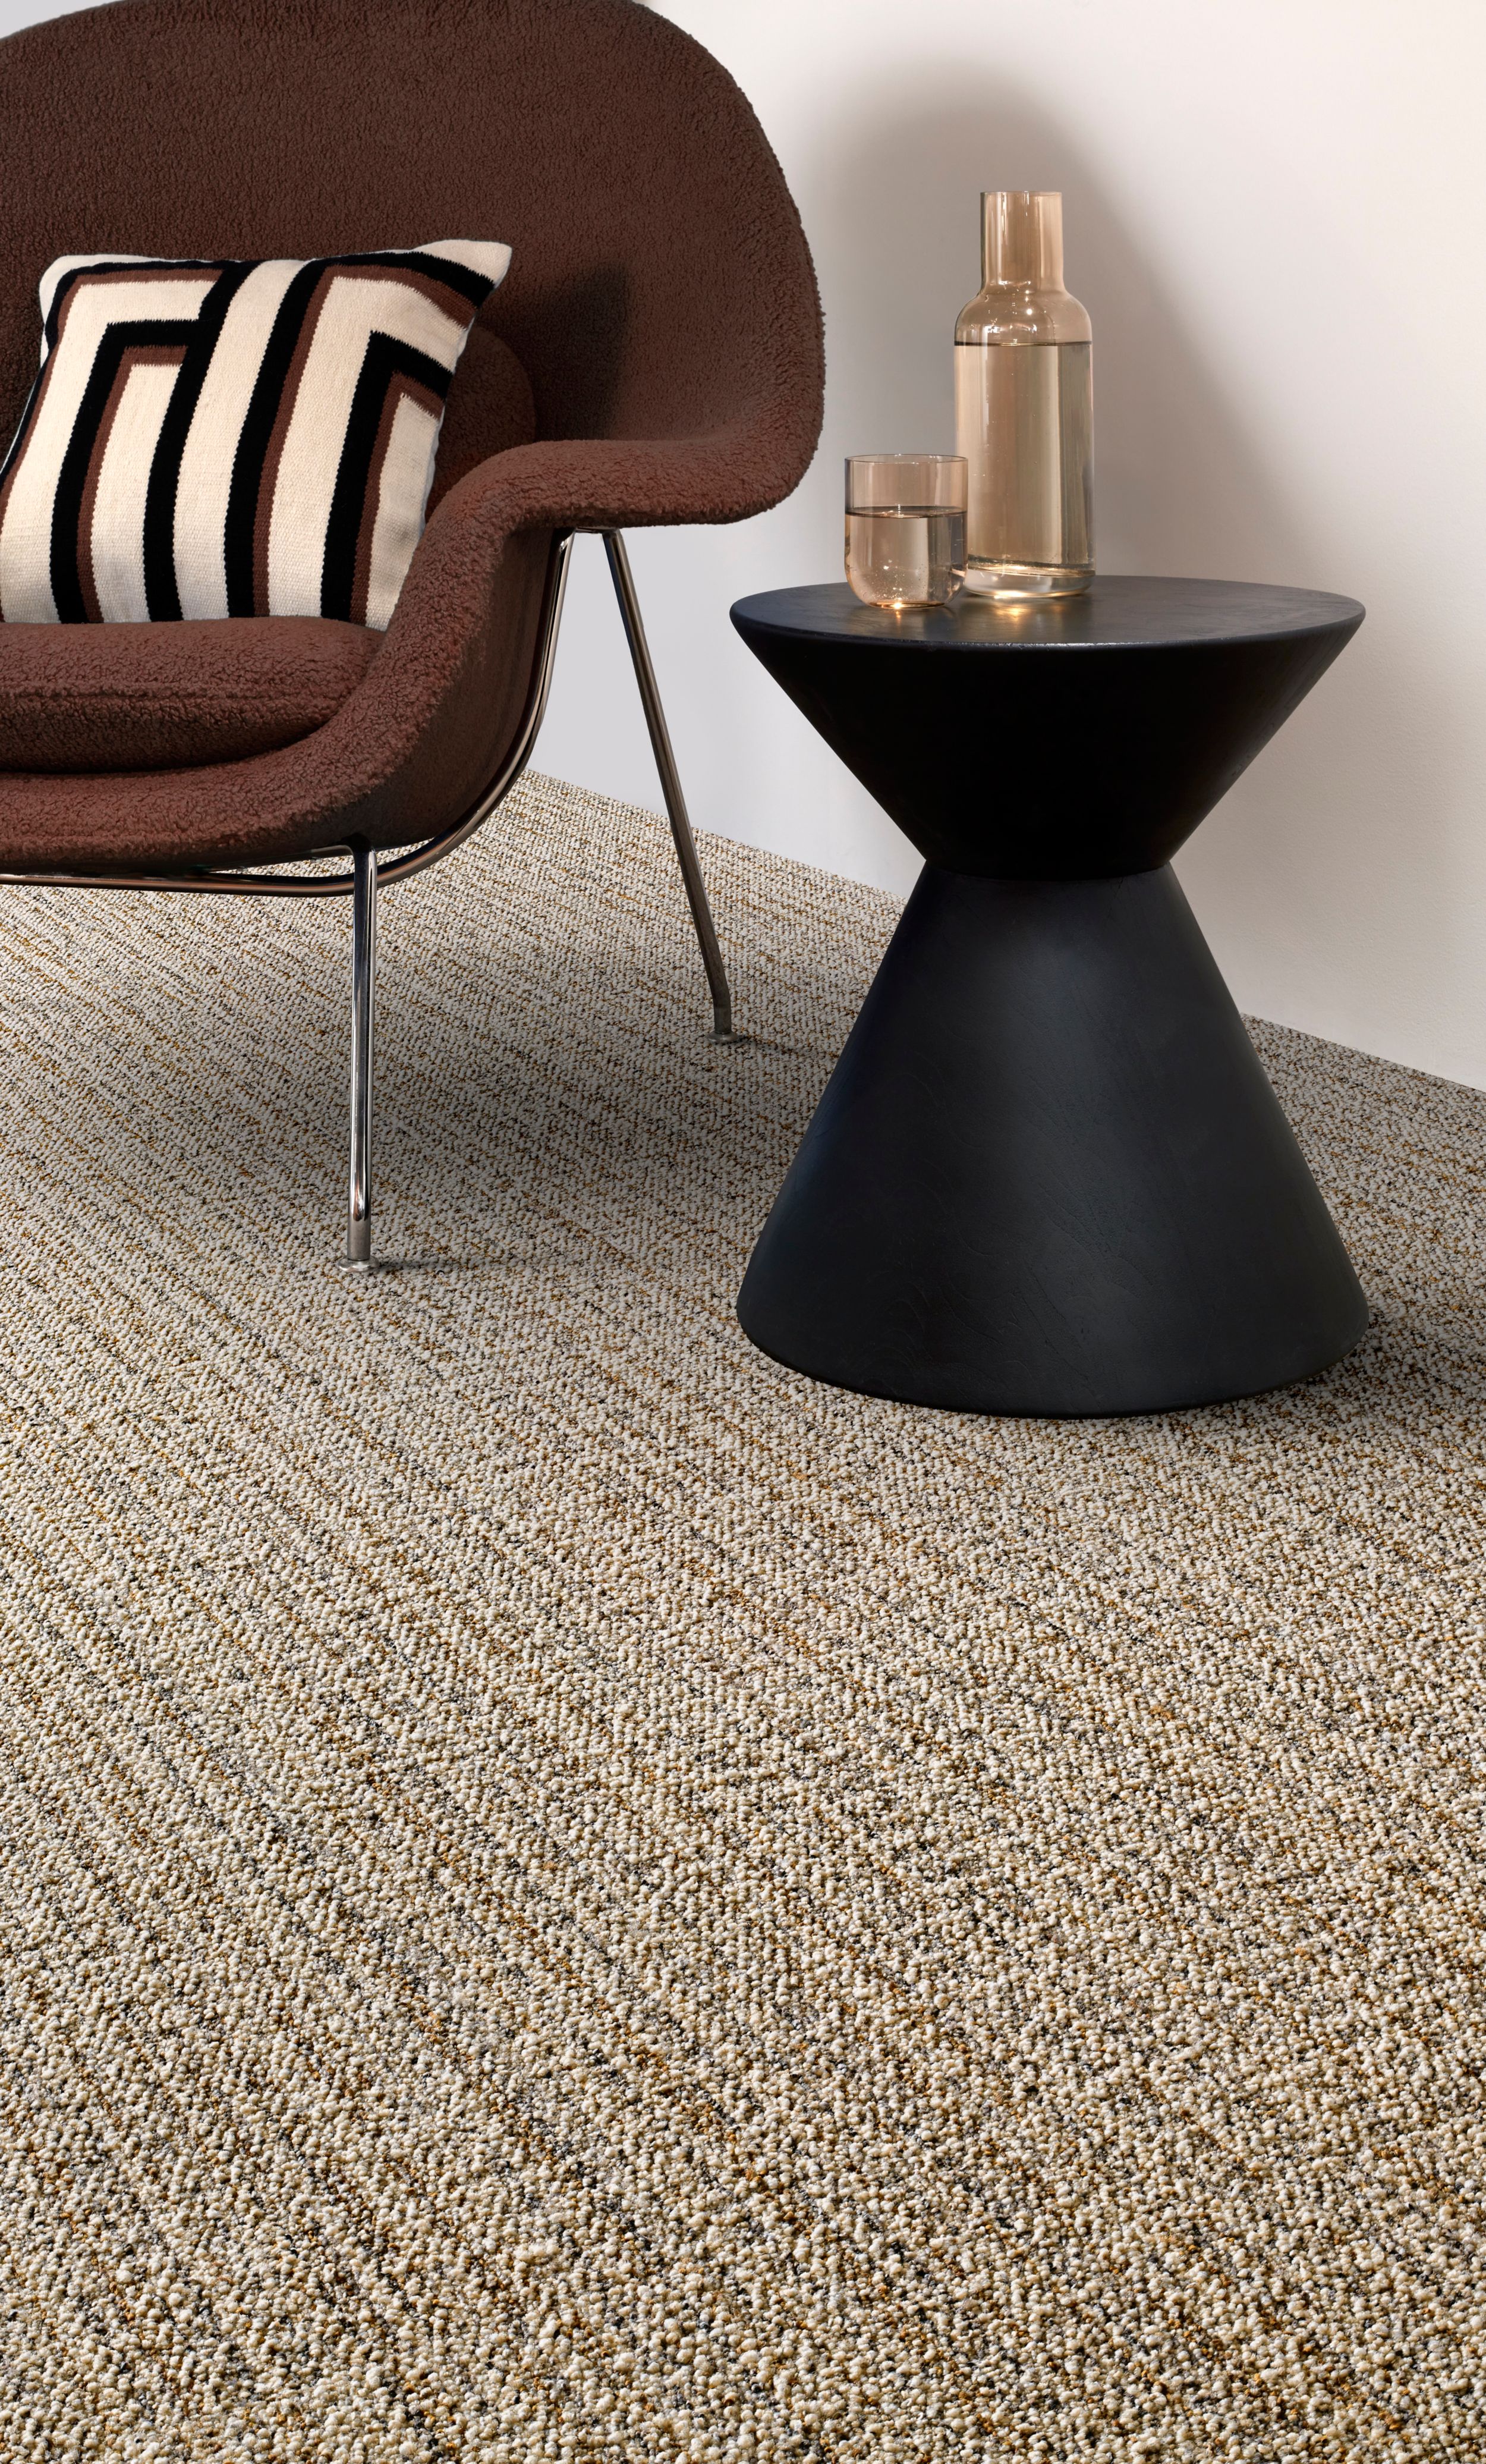 image Interface E616 plank carpet tile in corporate lobby or private office numéro 2